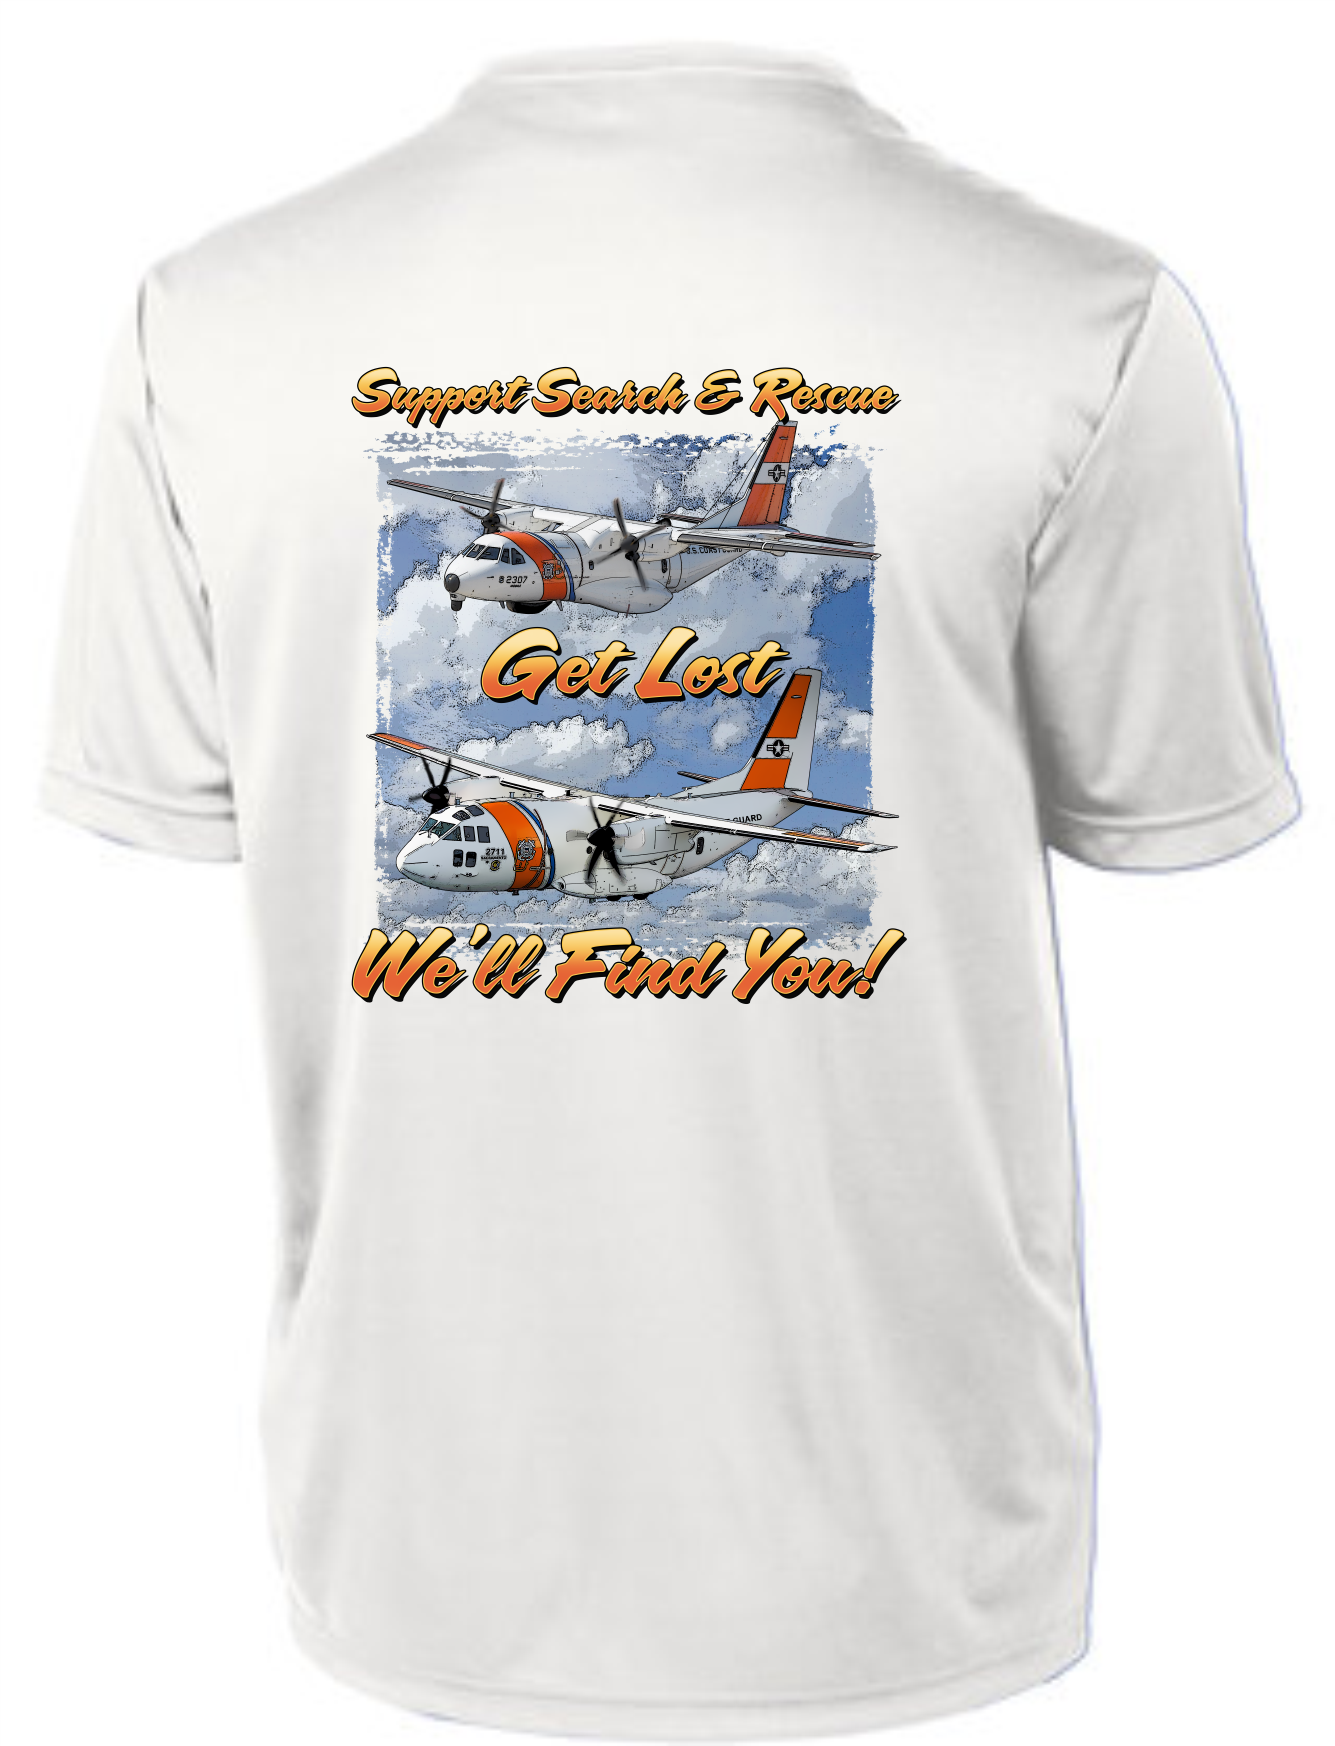 Unisex Search and Rescue Short Sleeve Tech Shirt